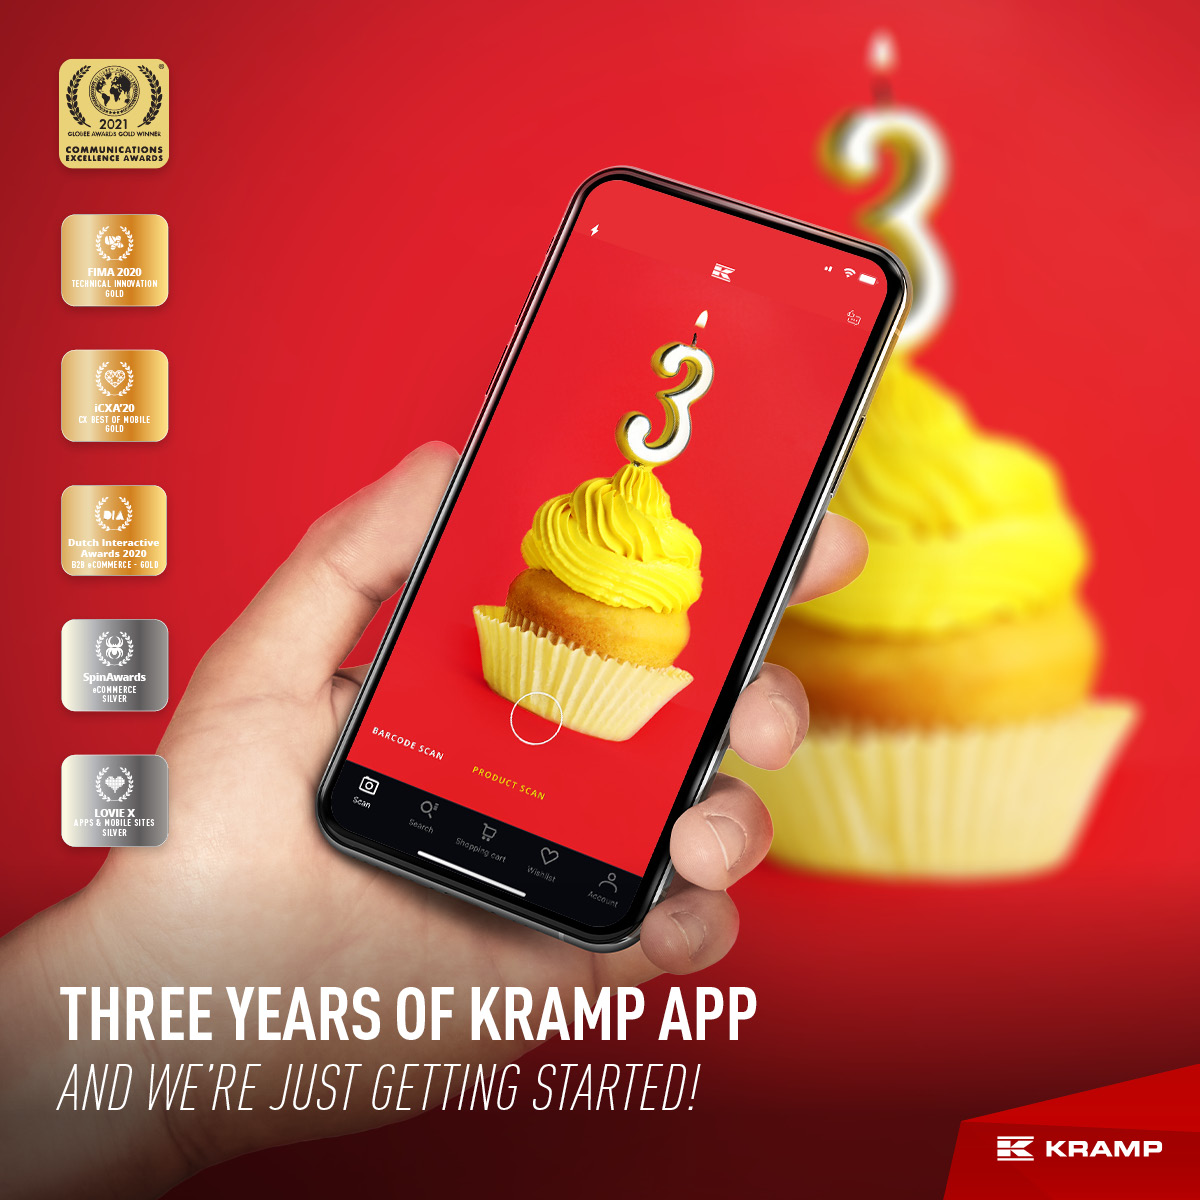 Birthday alert!🎂 On a day like today, three years ago, we were launching our Kramp App. It was a huge milestone in our digital transformation as a digitally driven and future-proof company. #krampapp #3years